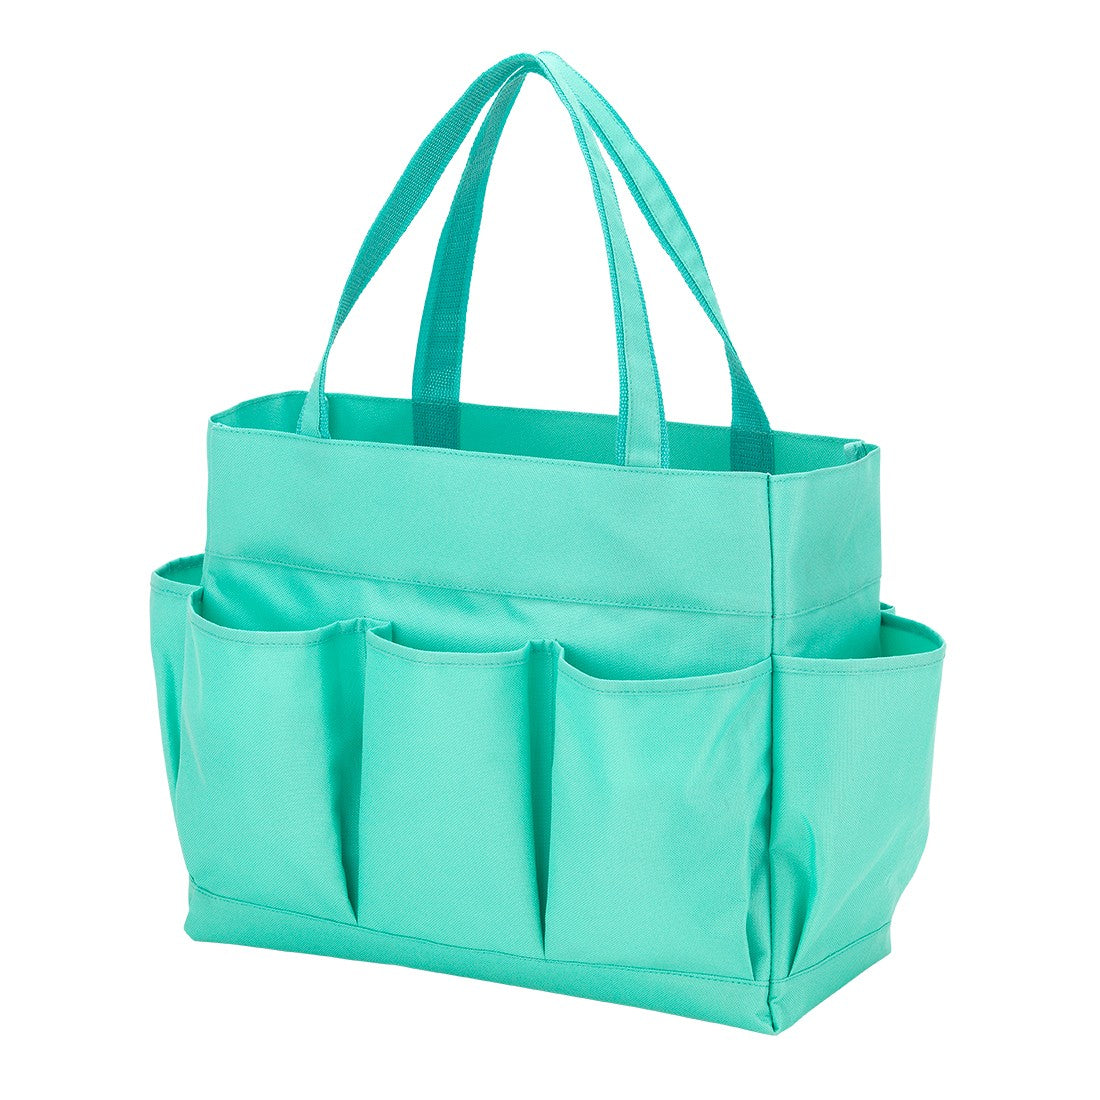 Purchase Blank or Personalized - kkgivingtree - Mint Carry All Bag - K&K's Giving Tree